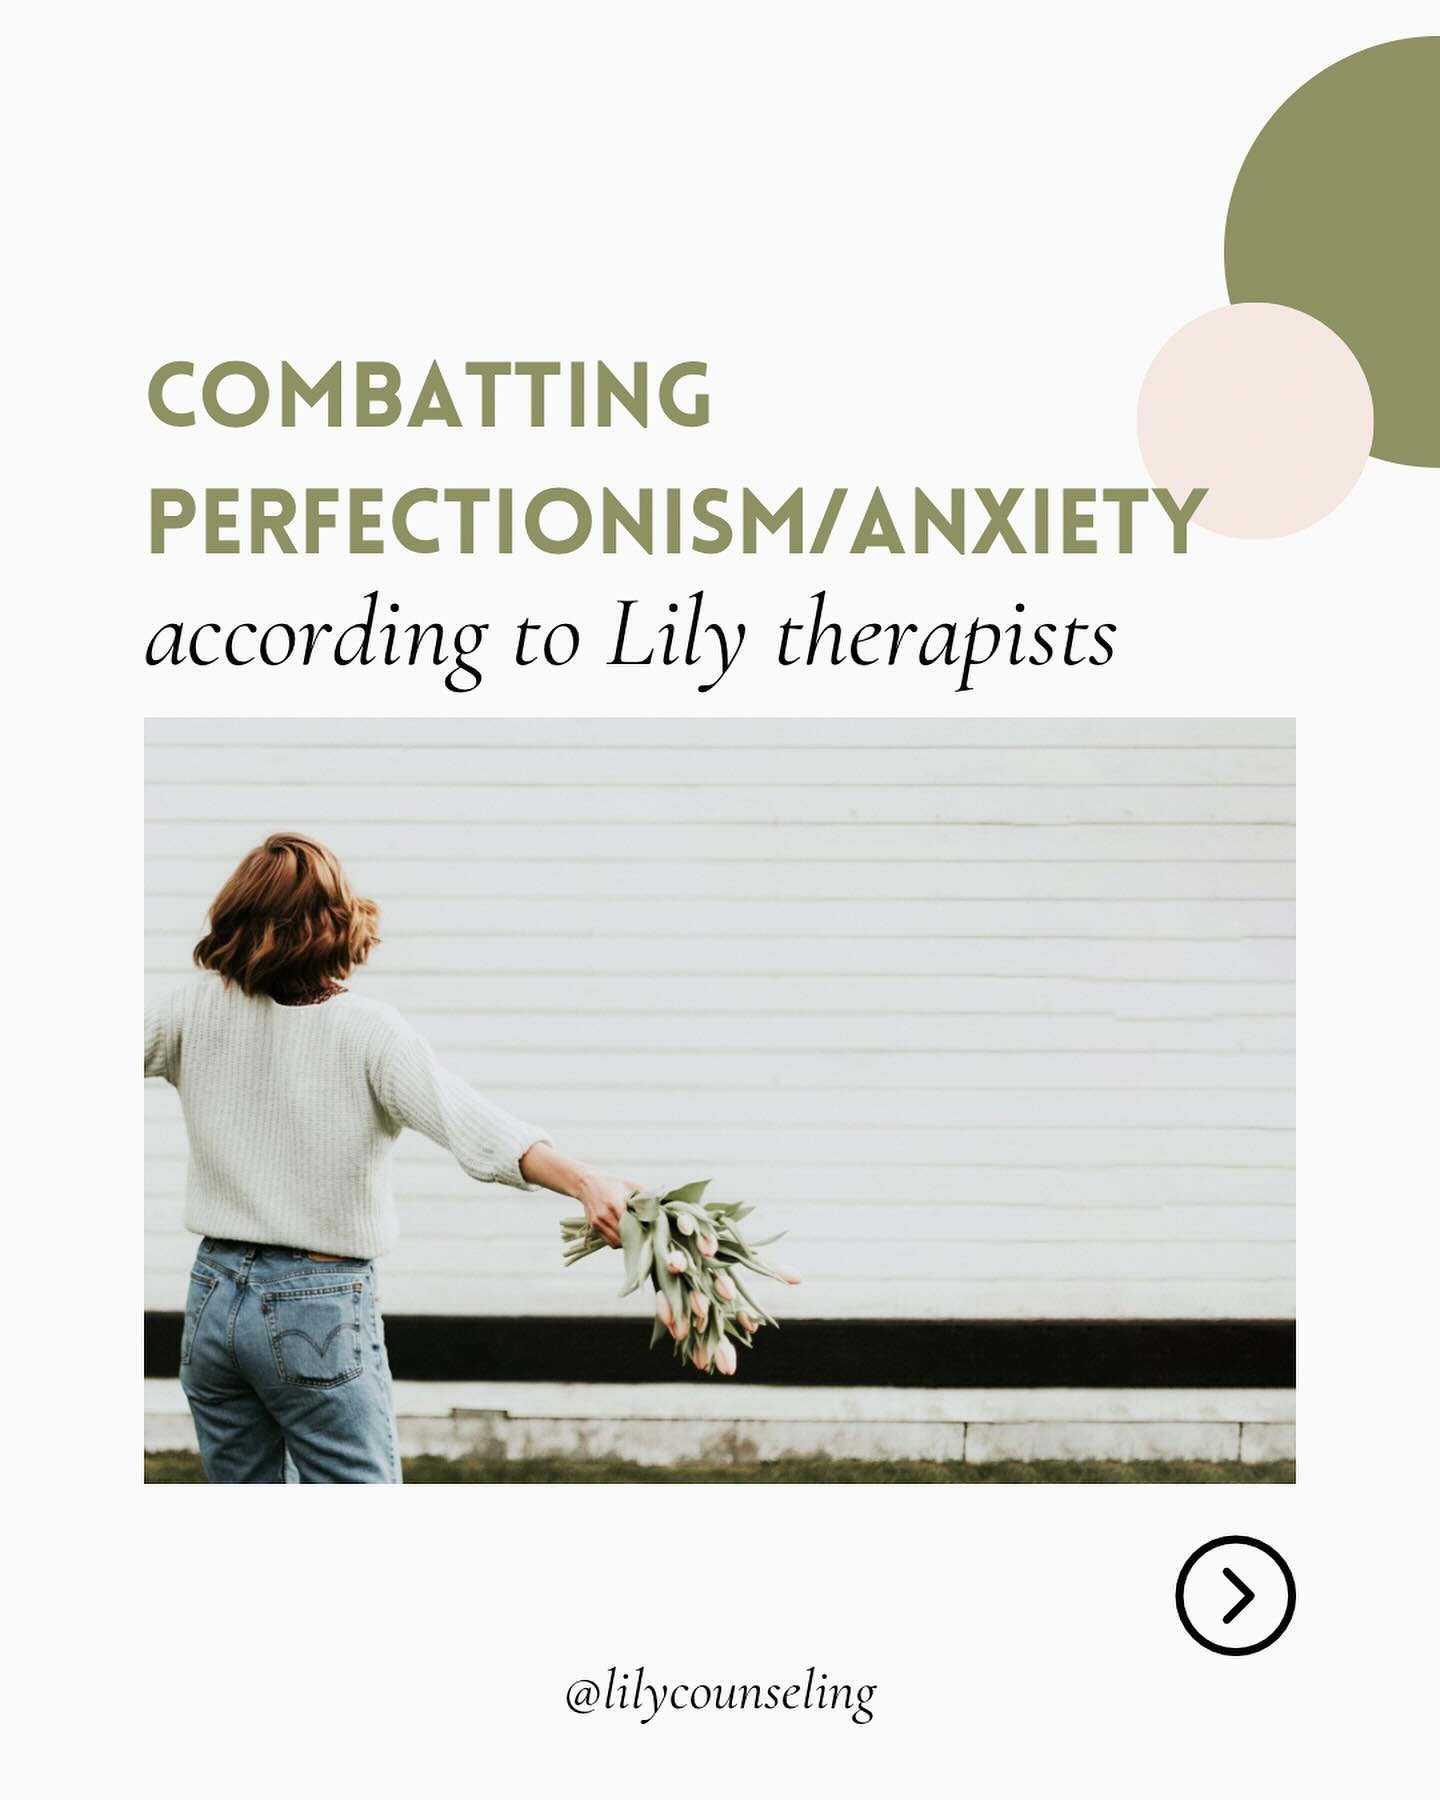 Save this post for 4 different ways of managing perfectionism and anxiety!

.
.
#lilycounseling #perfectionism #anxiety #copingskills #positiveaffirmations #artherapy #grounding #therapy #mentalhealth #chicagotherapy #chicagotherapists #therapyinchic